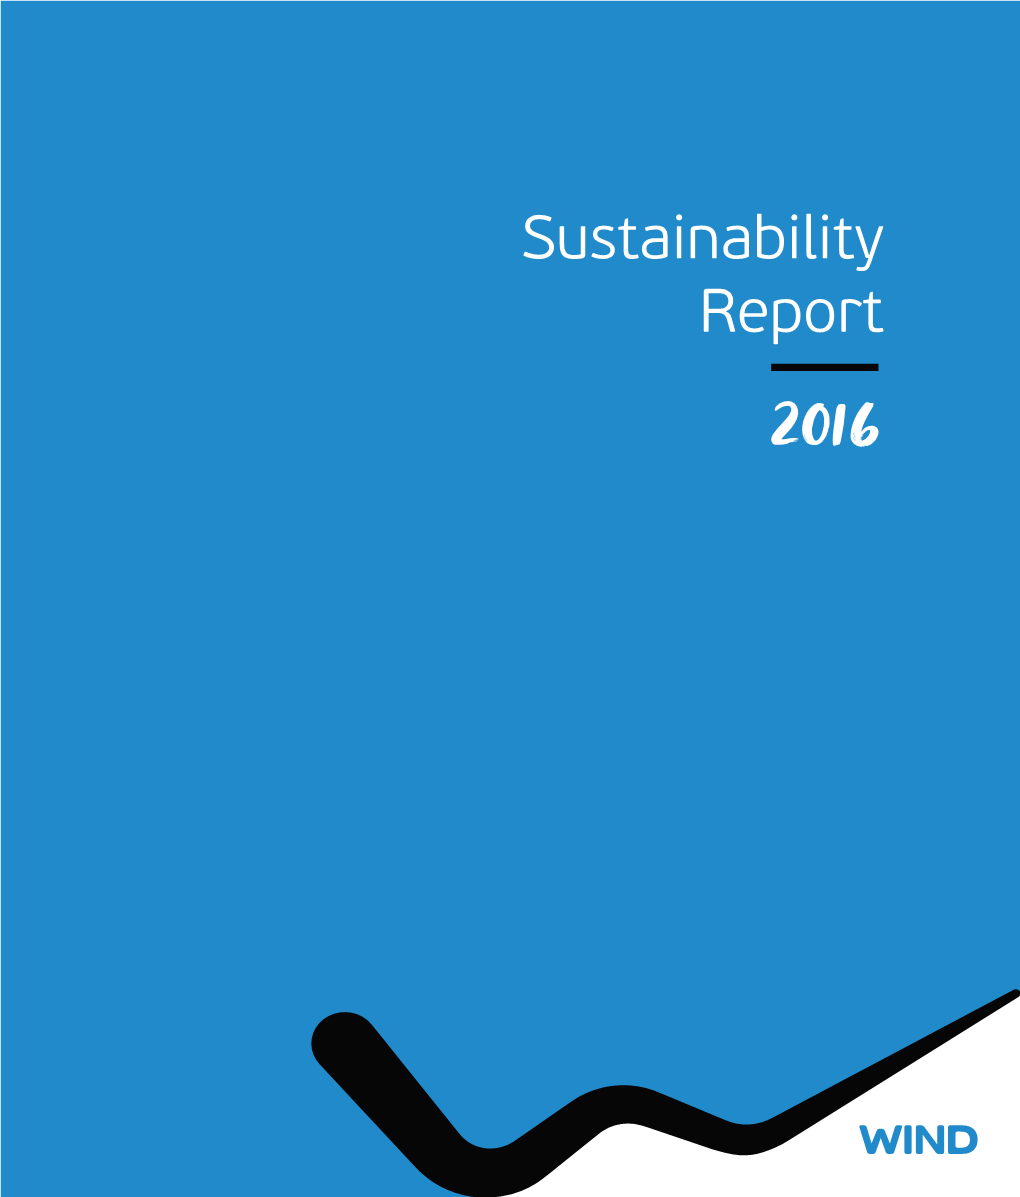 Sustainability Report OUR CONTRIBUTION to SOCIETY, the ECONOMY, to the SUSTAINABLE DEVELOPMENT GOALS